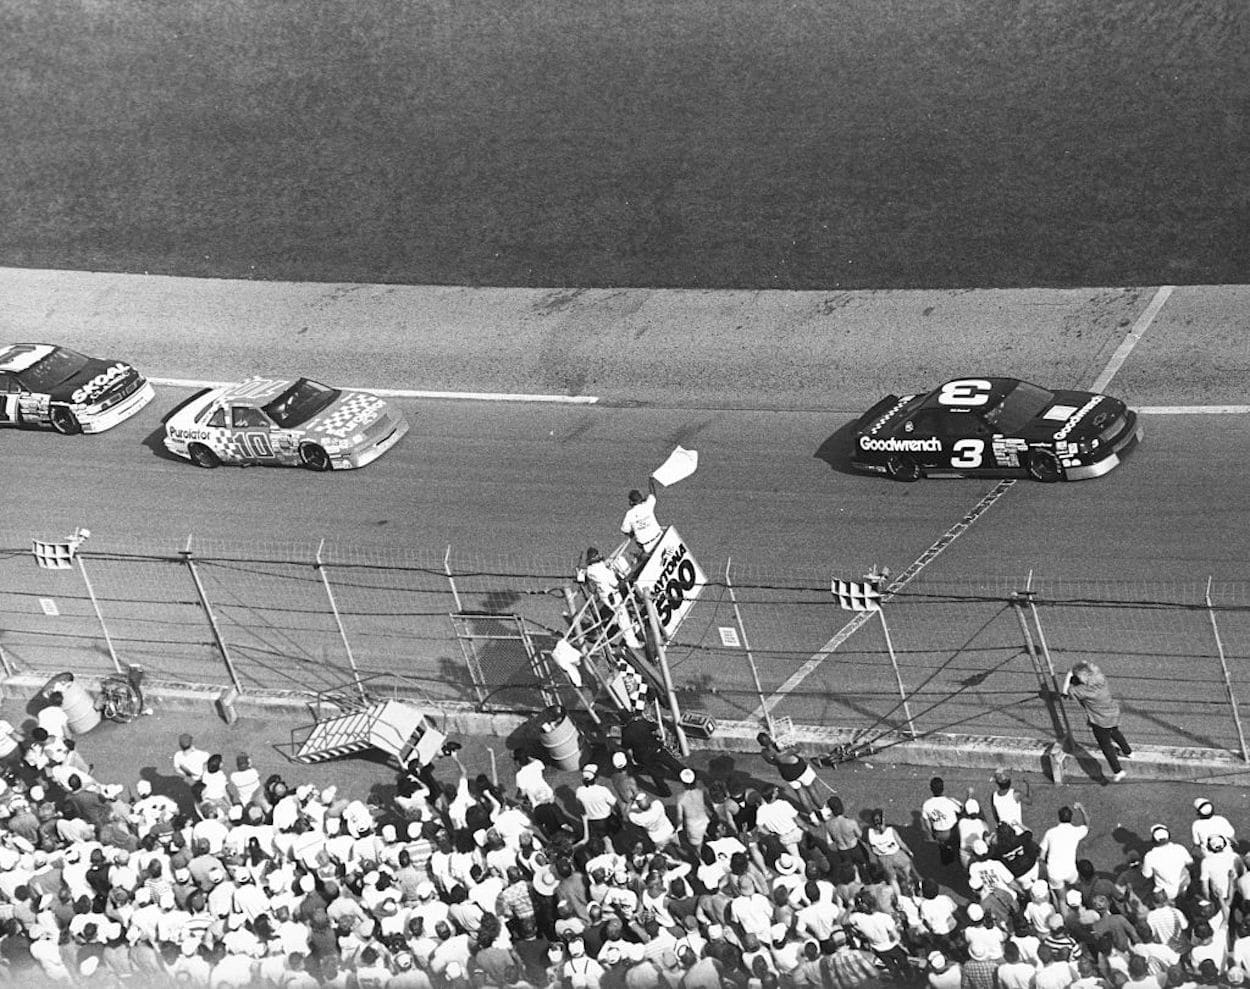 Dale Earnhardt (No. 3) leads the 1990 Daytona 500, but he couldn't secure the win.